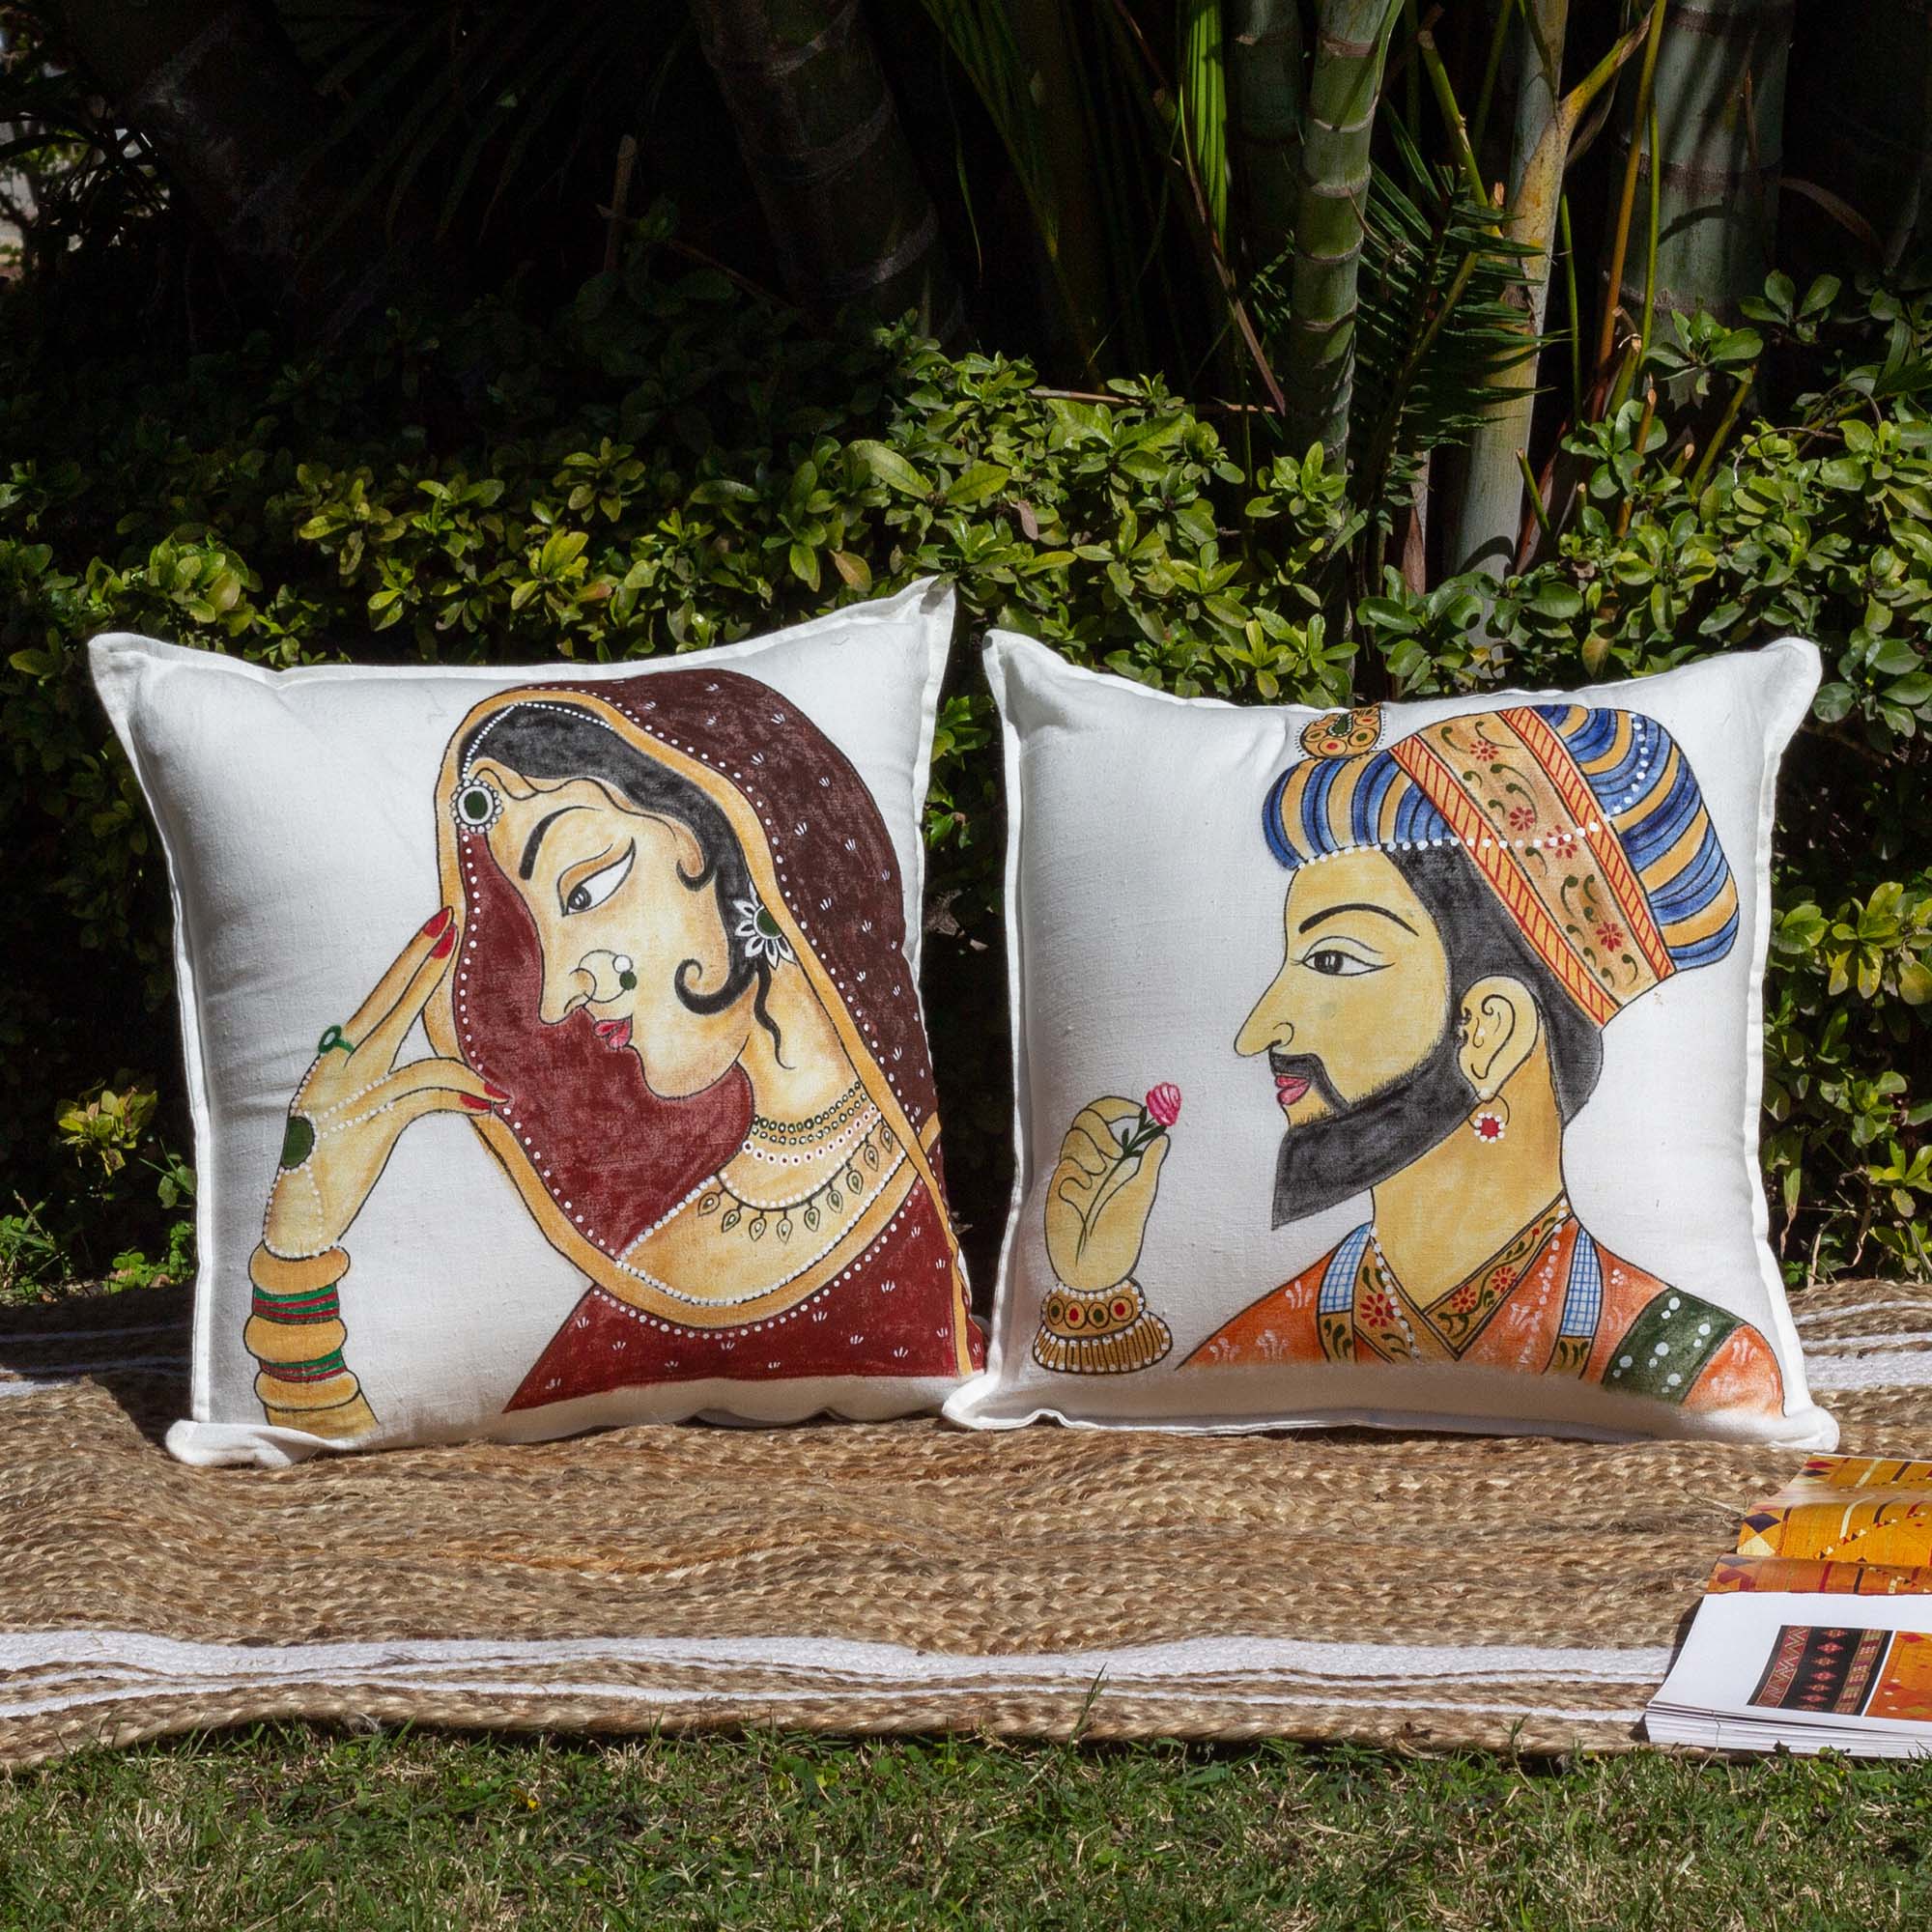 Buy Cushions & Pillows Covers Online